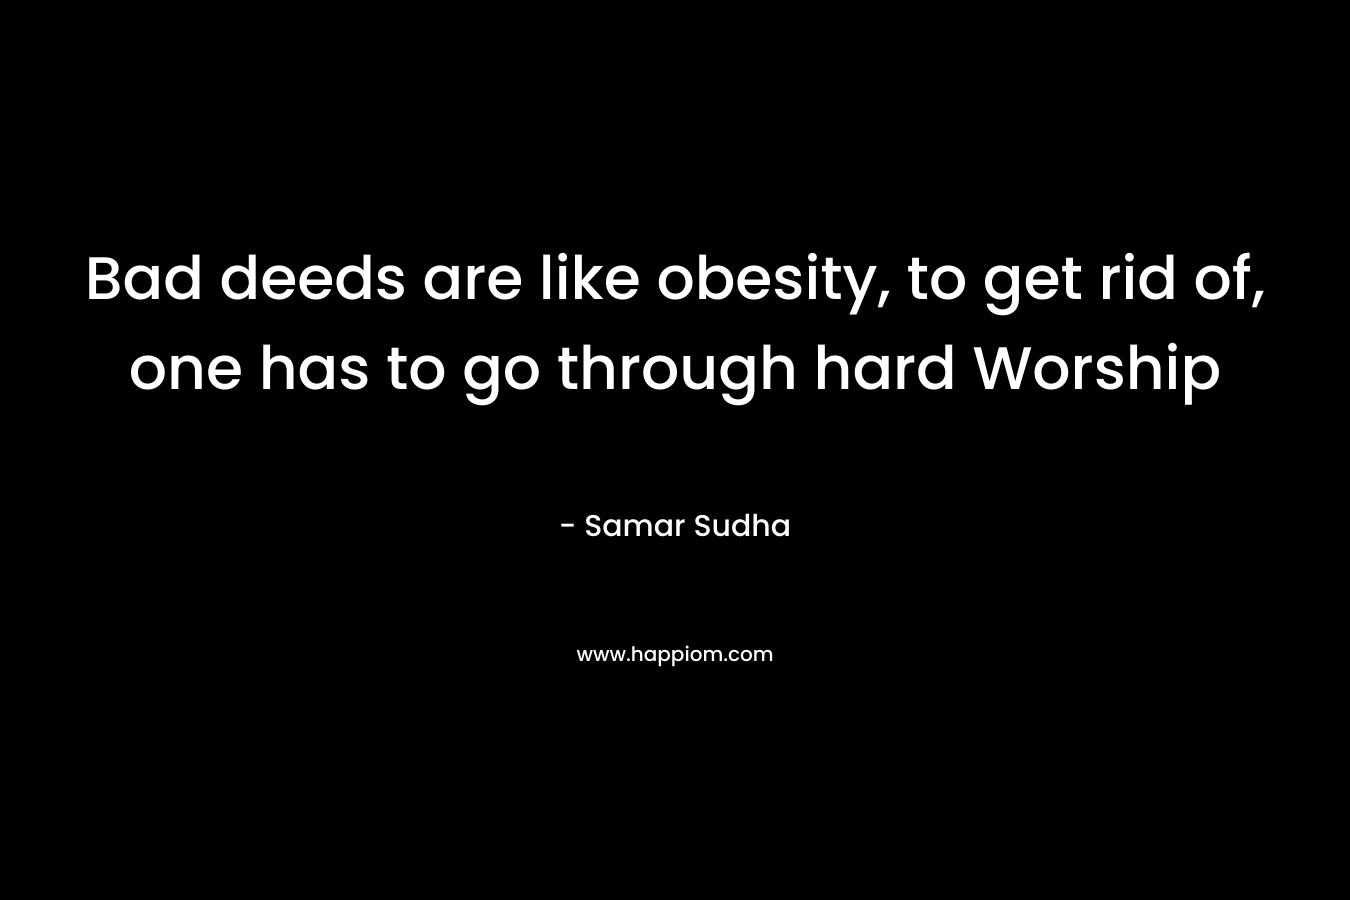 Bad deeds are like obesity, to get rid of, one has to go through hard Worship – Samar Sudha